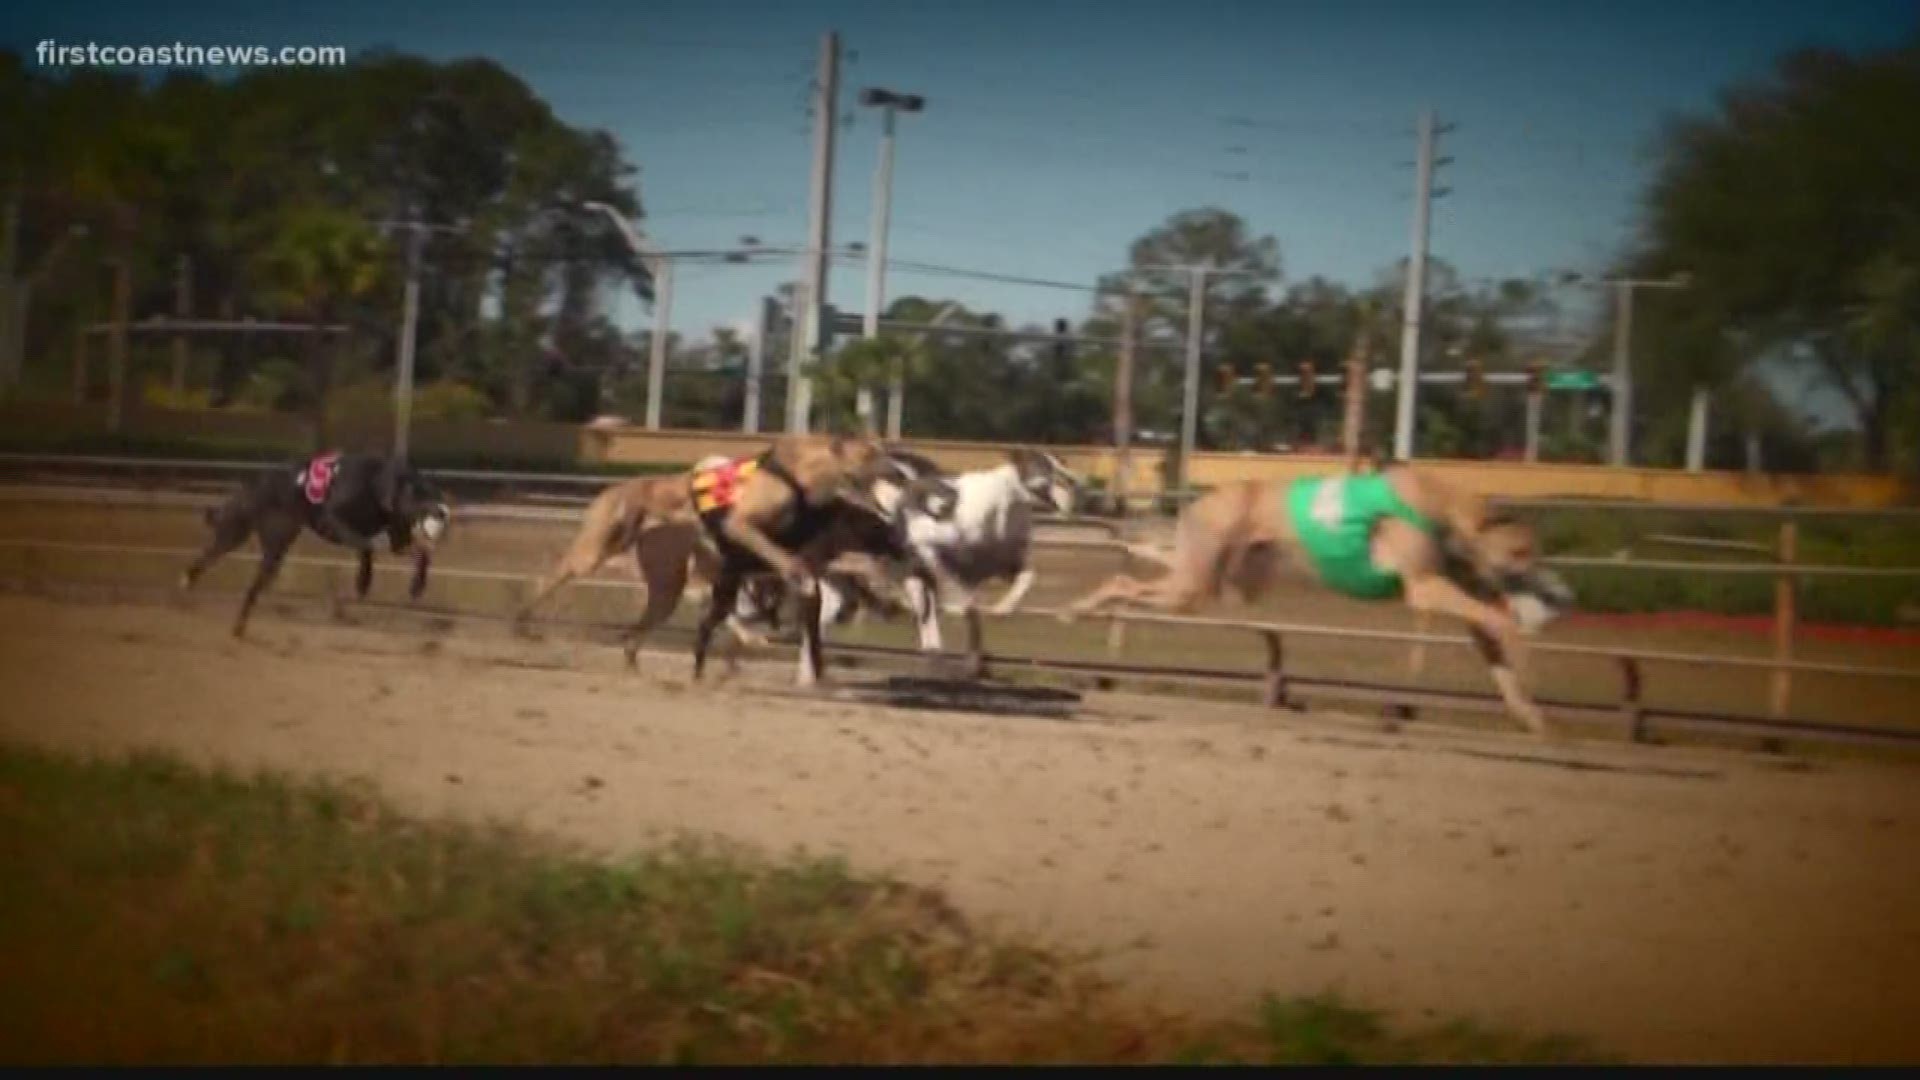 Amendment 13 passed by almost 70% of the voters in Florida in November 2018.  It says greyhound racing must shut down by the end of 2020. A look at which tracks are closed already and which will race to the end.